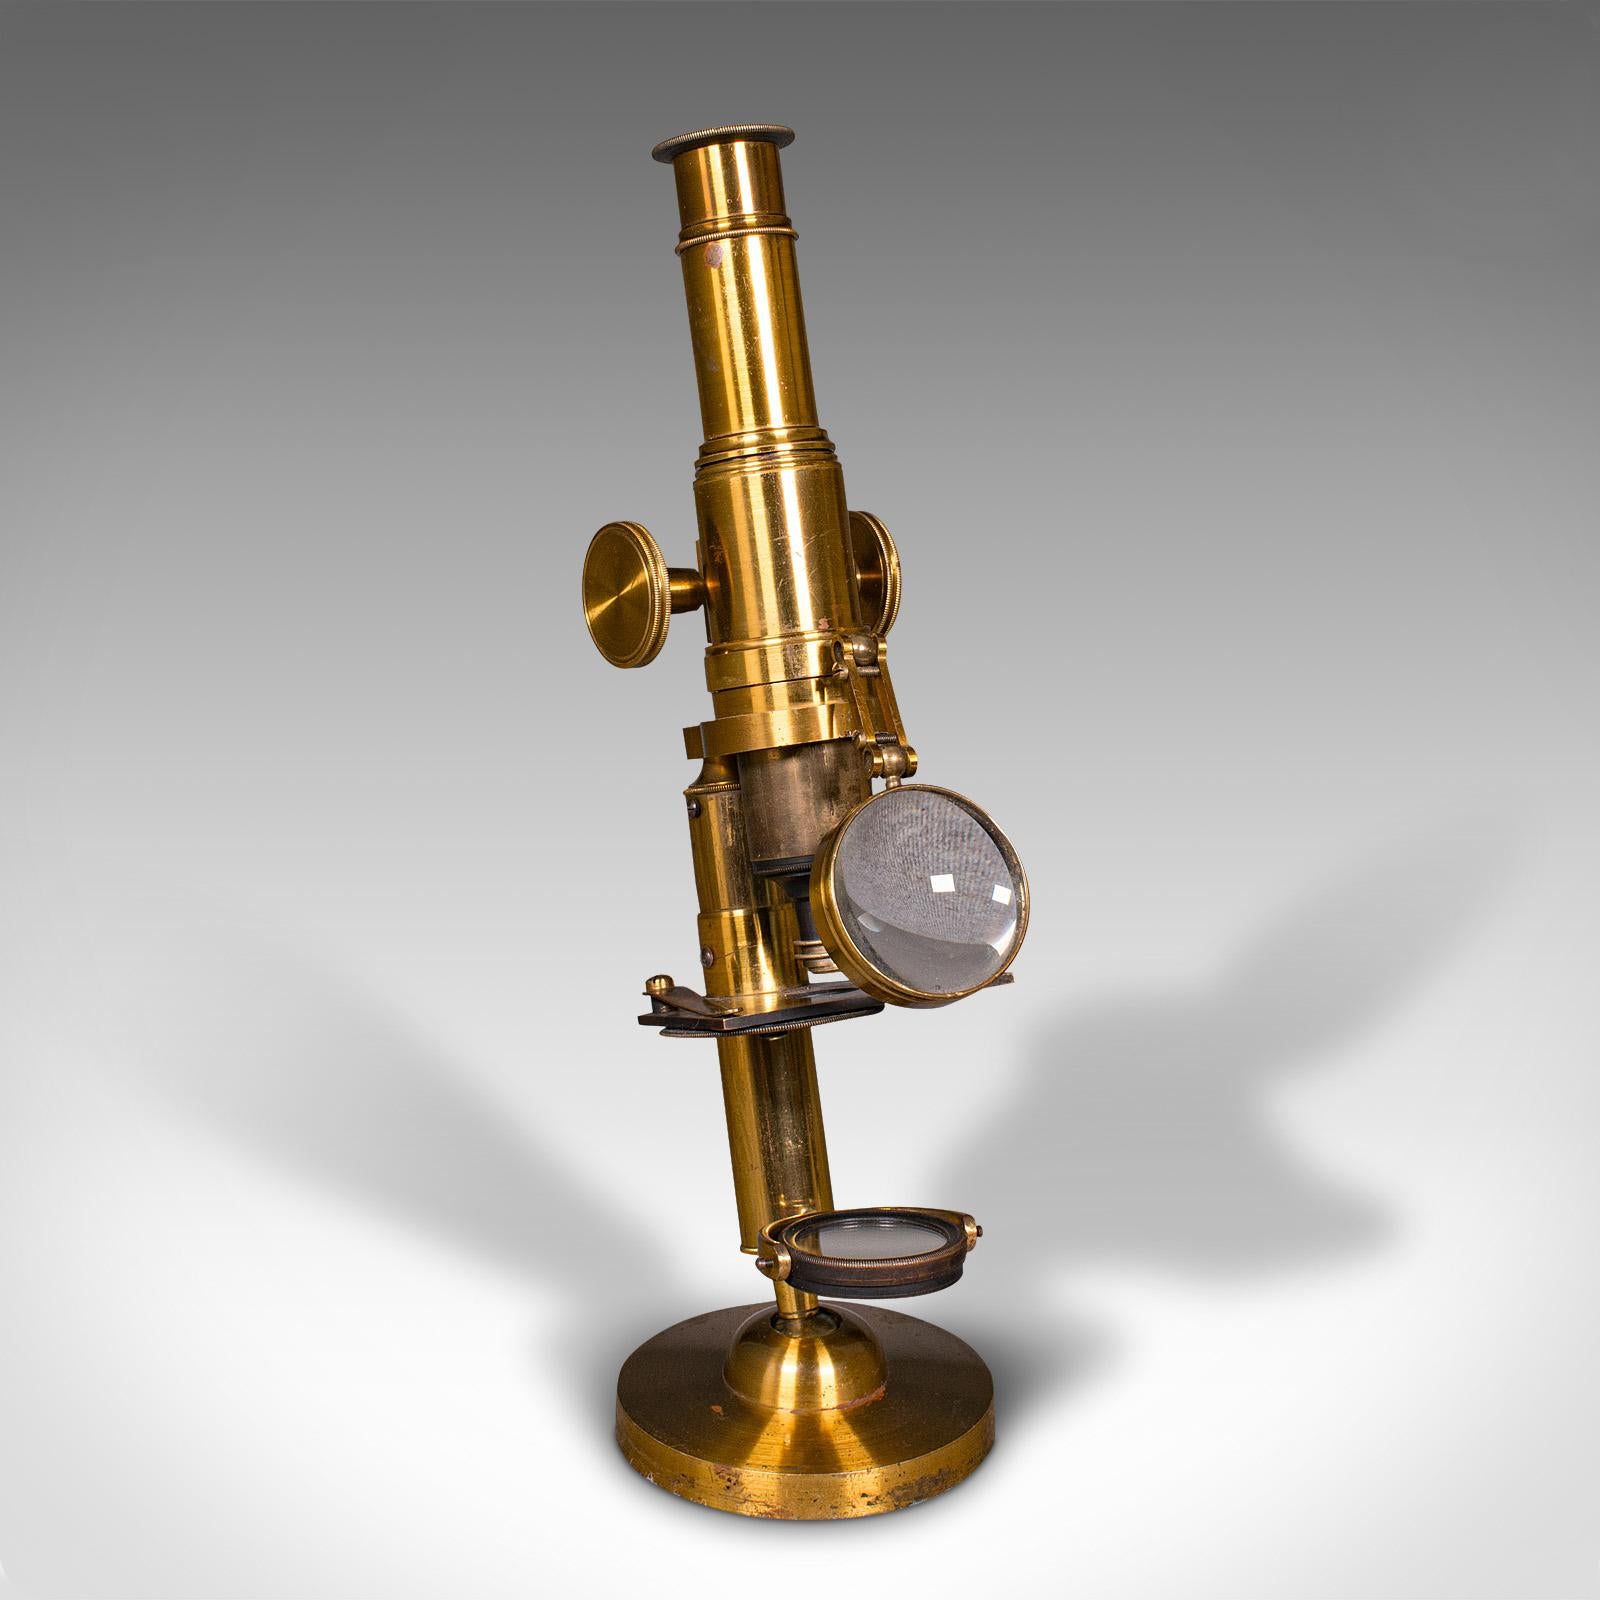 This is an antique cased scholar's microscope. An English, brass scientific instrument, dating to the early 20th century, circa 1920.

Fascinating cased microscope with distinctive articulated function
Displays a desirable aged patina and in good